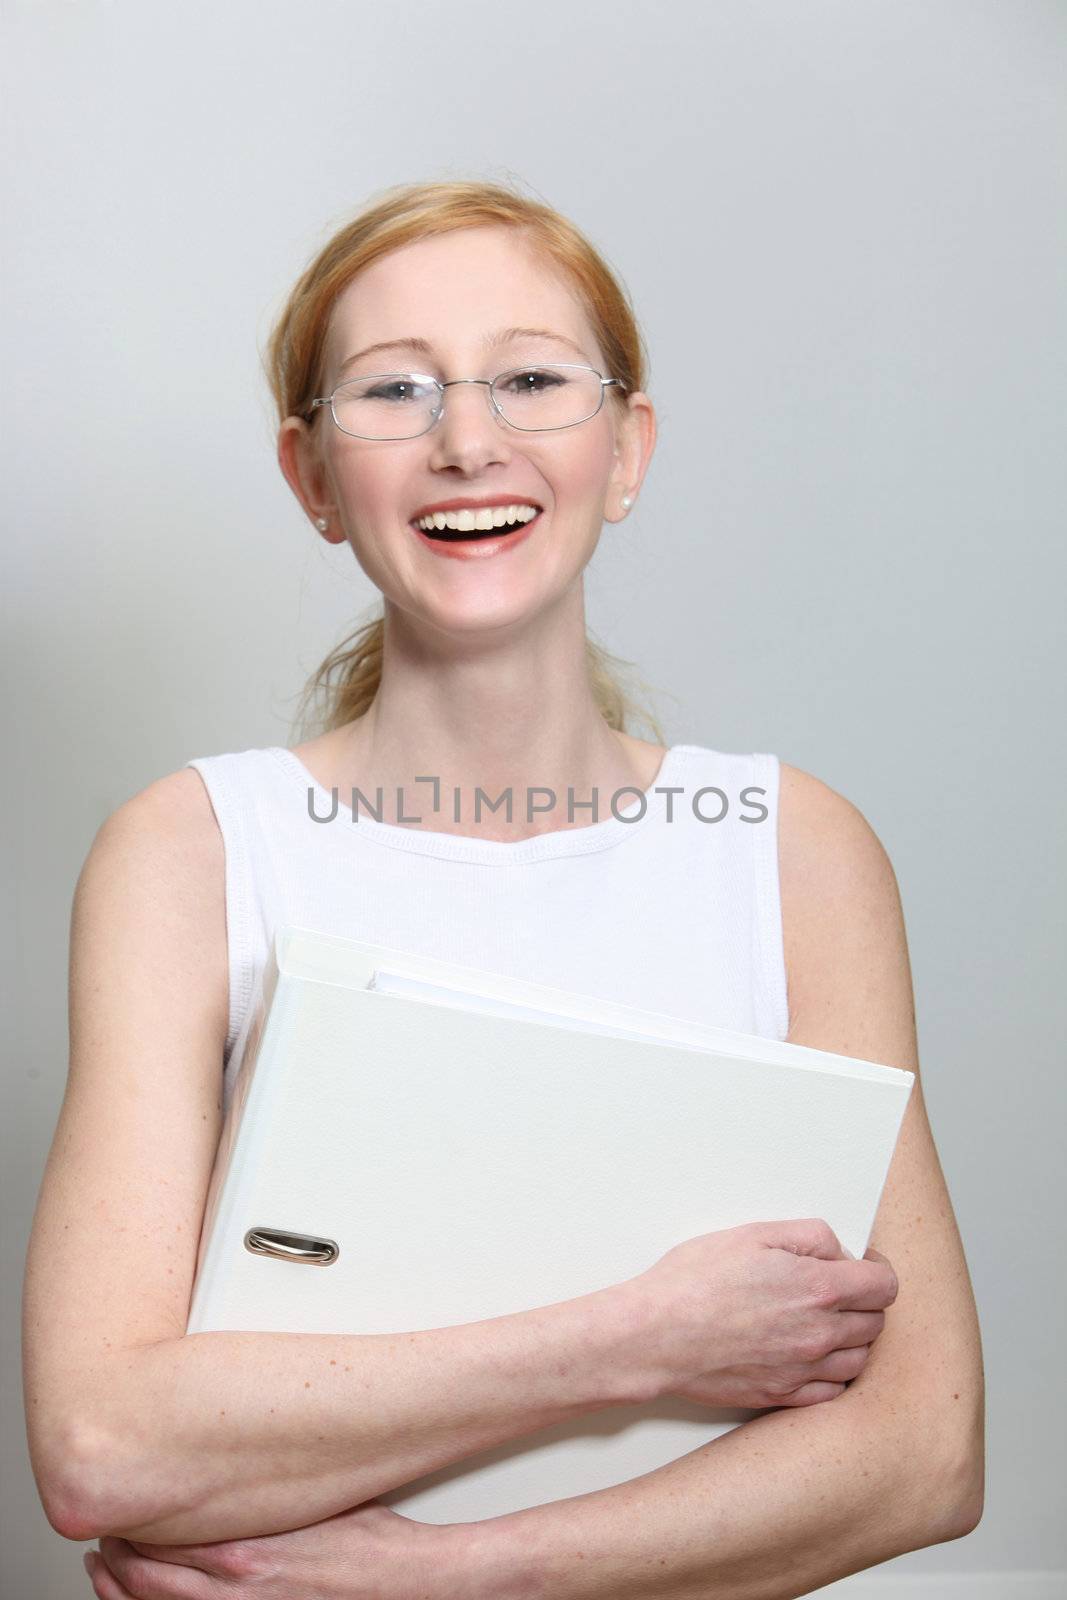 Smiling young woman with glasses and file folder    by Farina6000